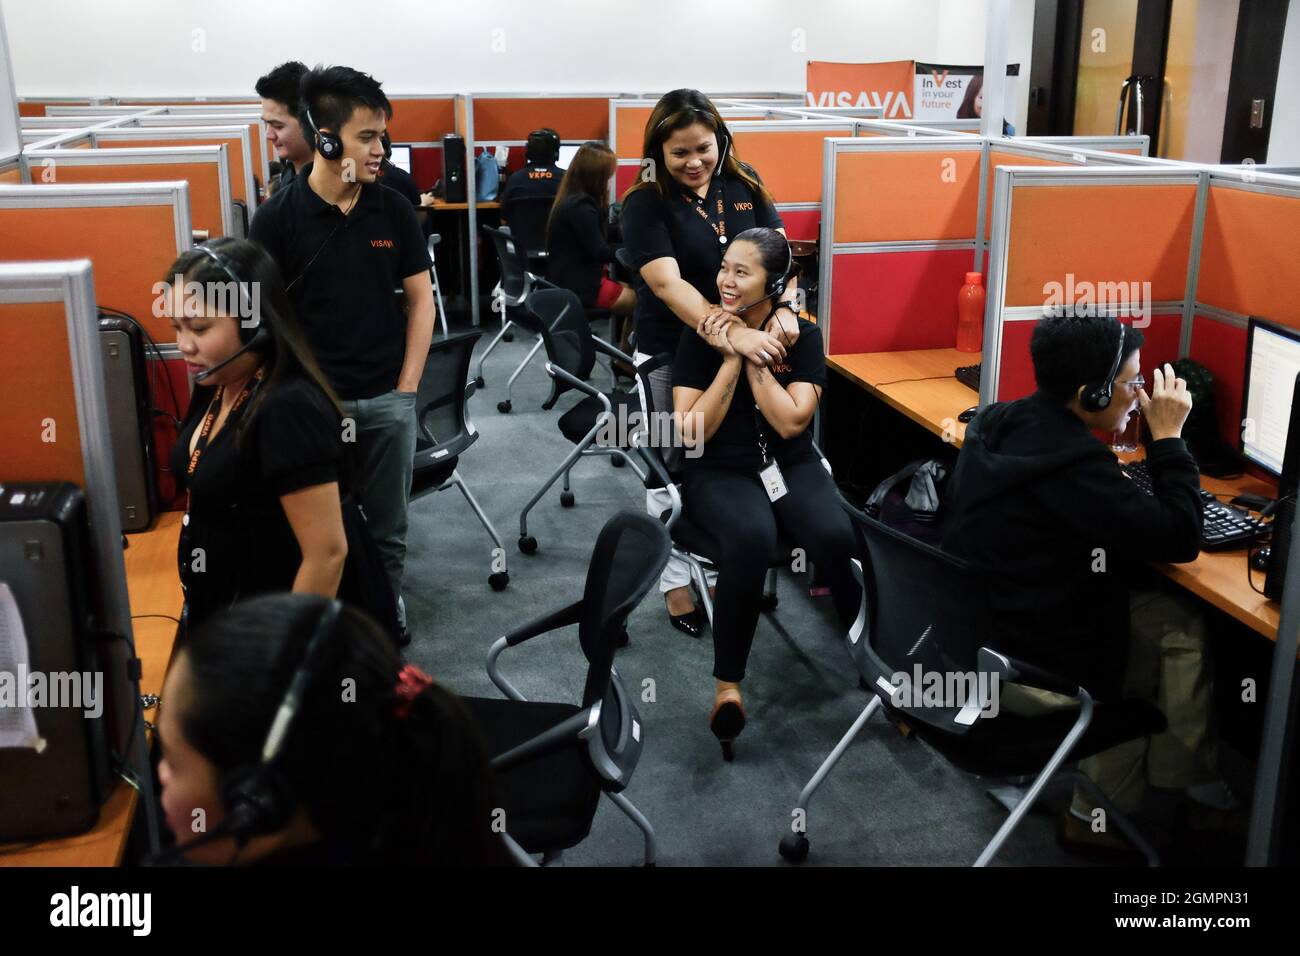 Customer Service Representatives at the Visaya Knowledge Process Outsourcing (VKPO) call center, in Makati, during the night shift. Stock Photo